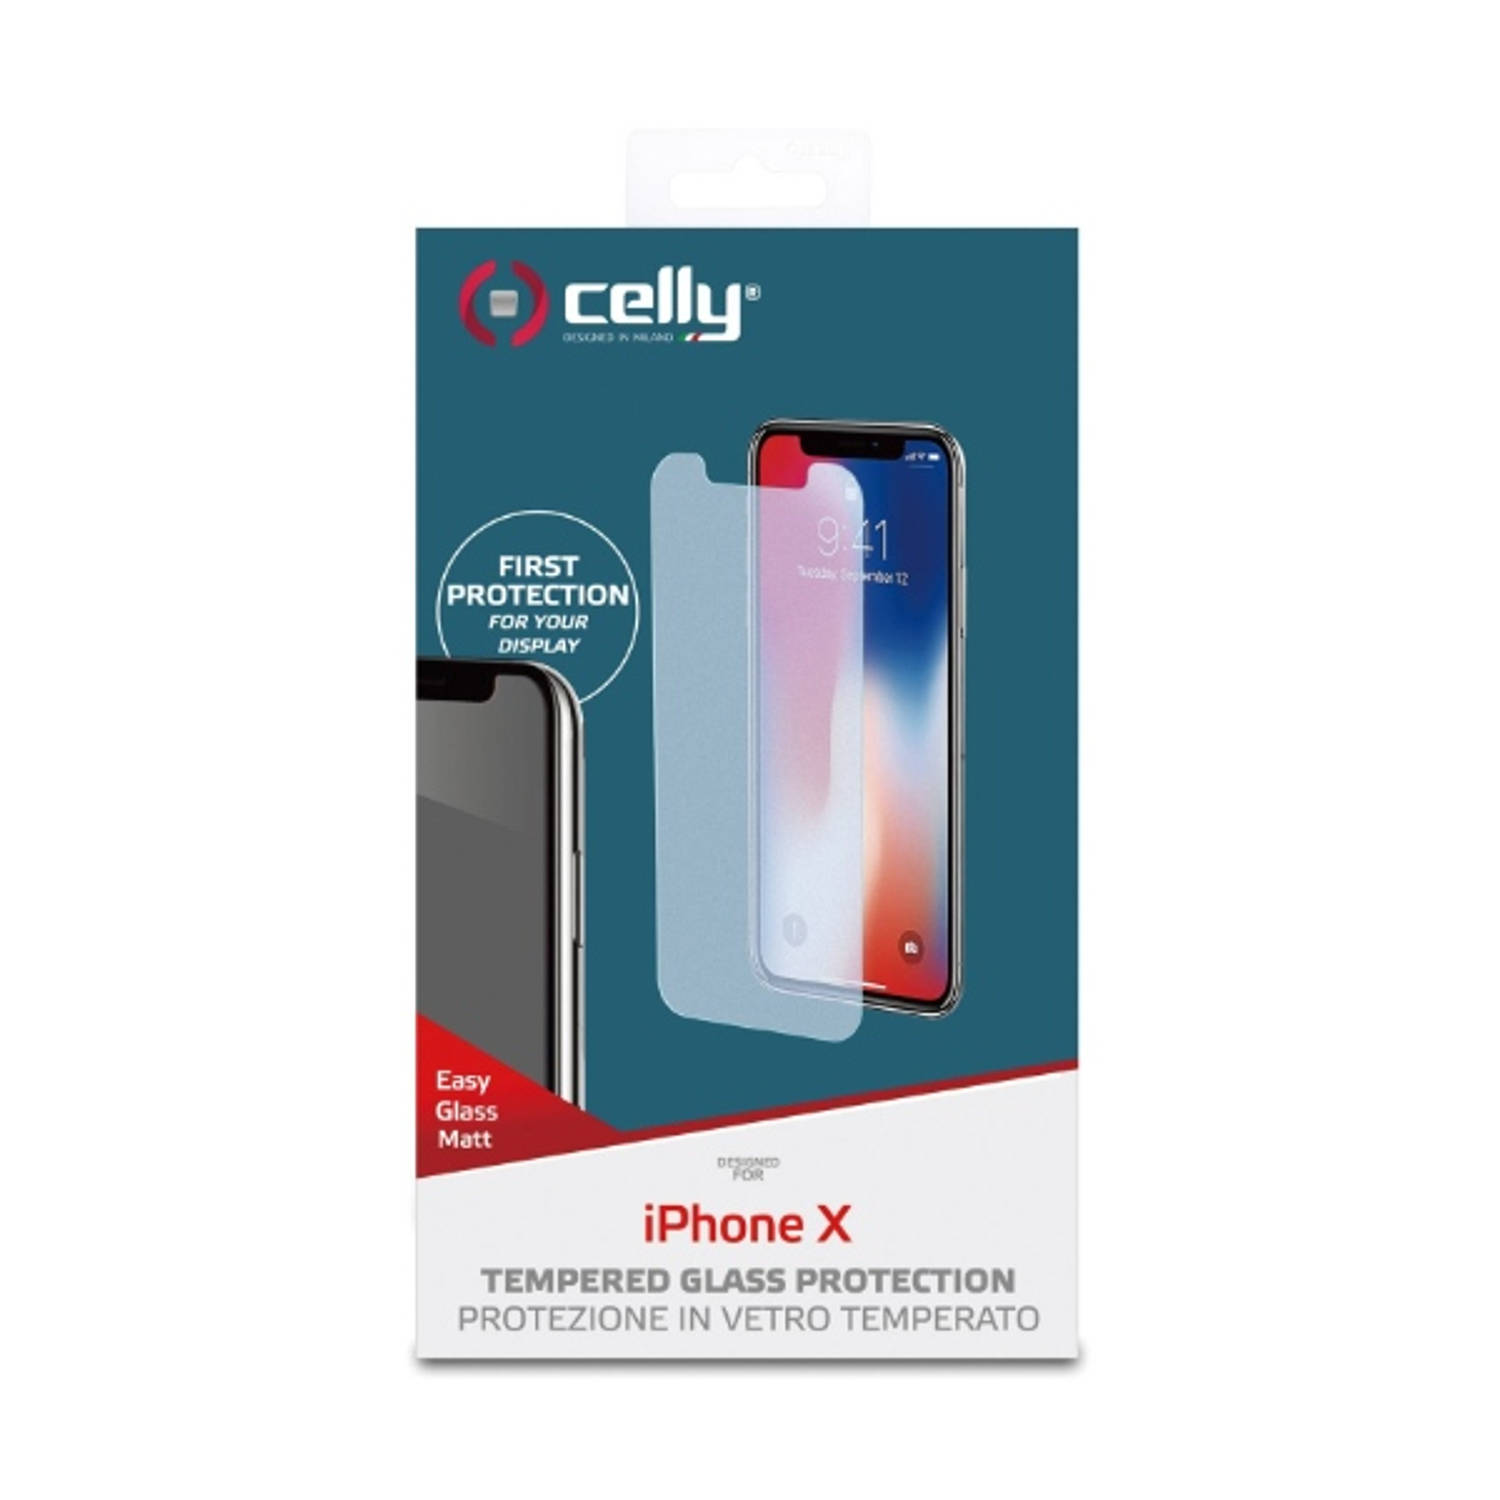 Easy Glass screenprotector voor iPhone Xs/X - Glas - Celly